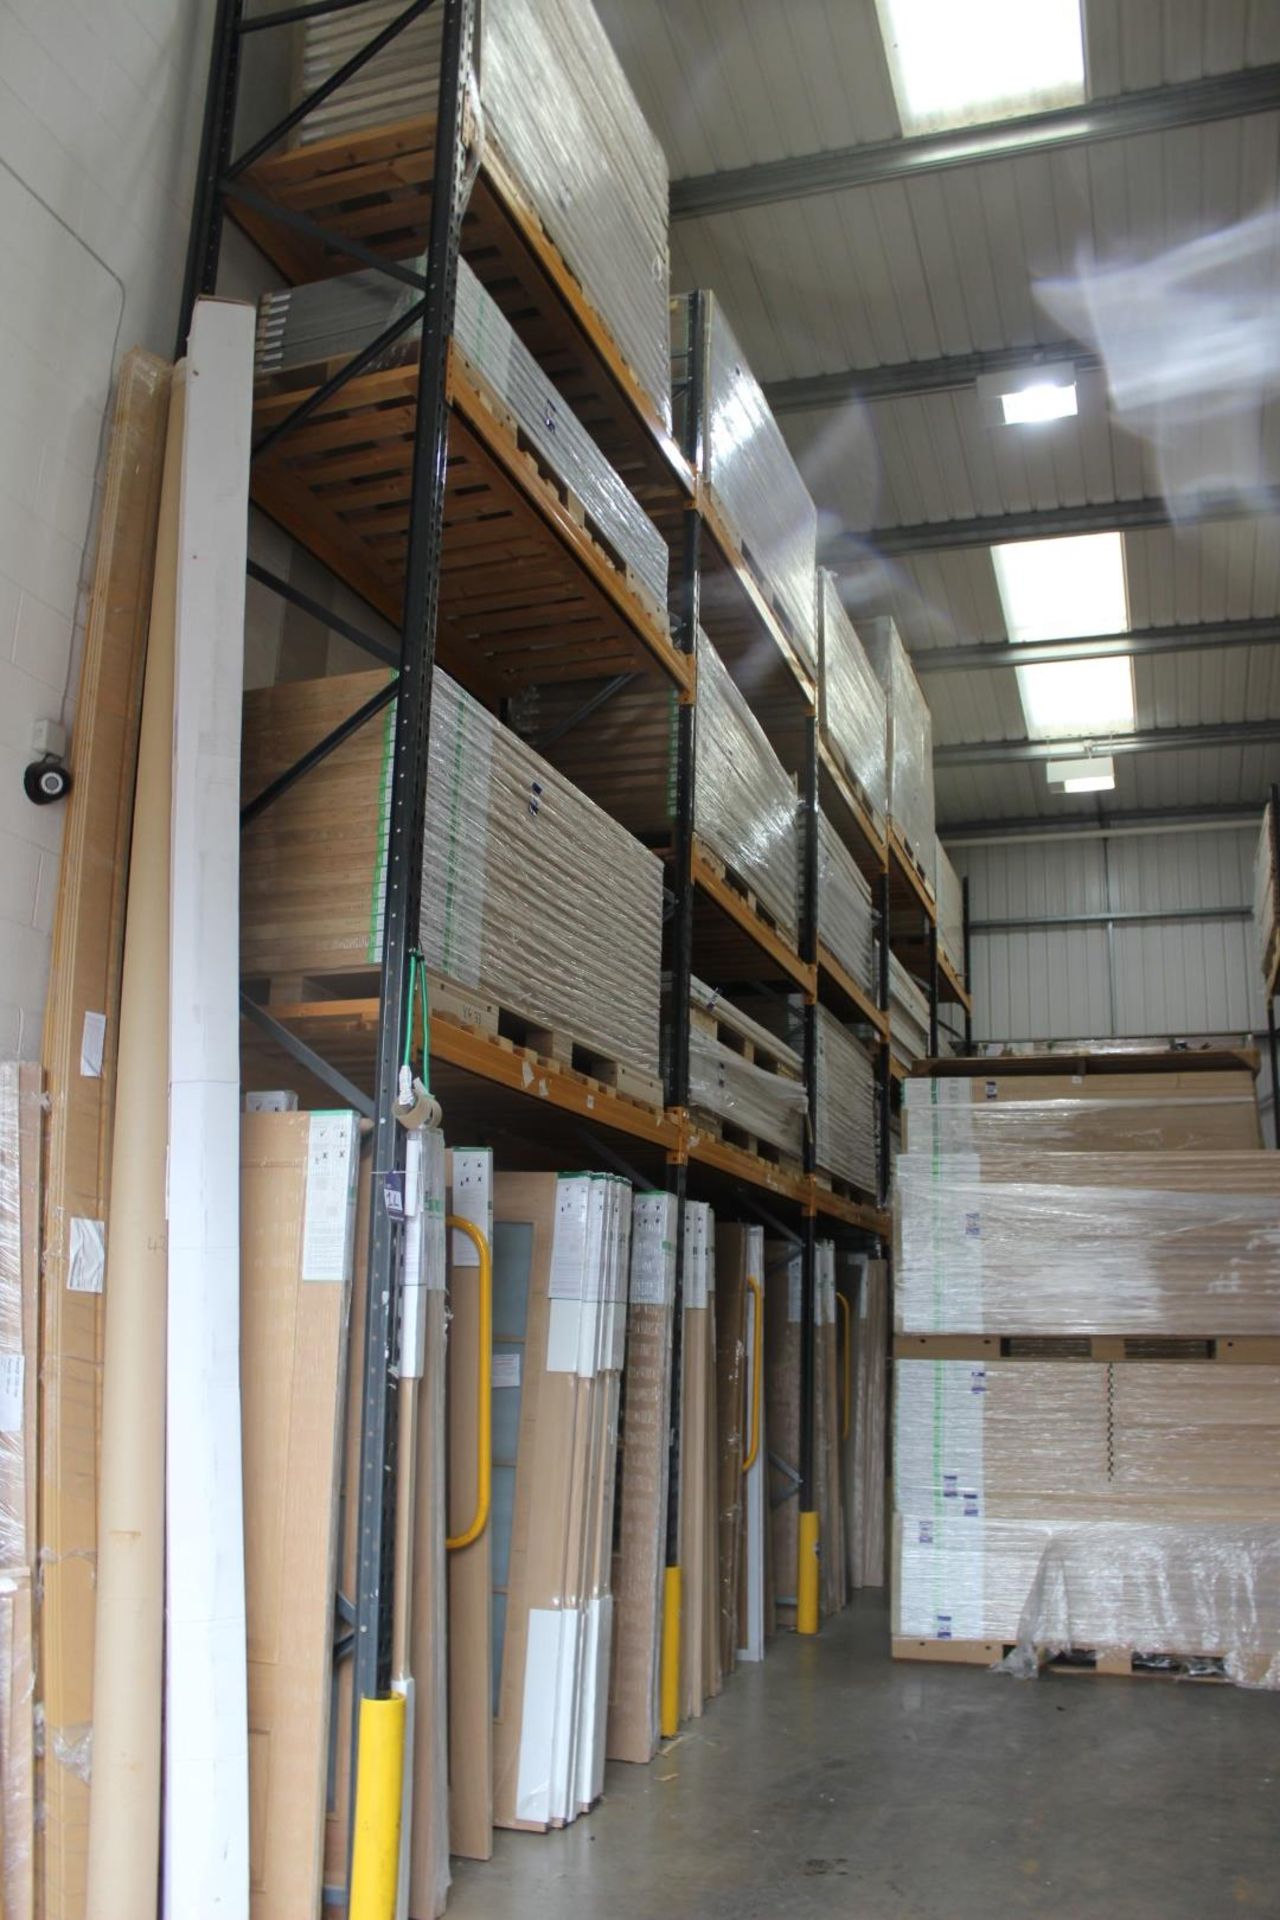 5 x Bays of Link 51E pallet racking, comprising 6 x 6m uprights, 36 x 2.4m cross beams, wooden